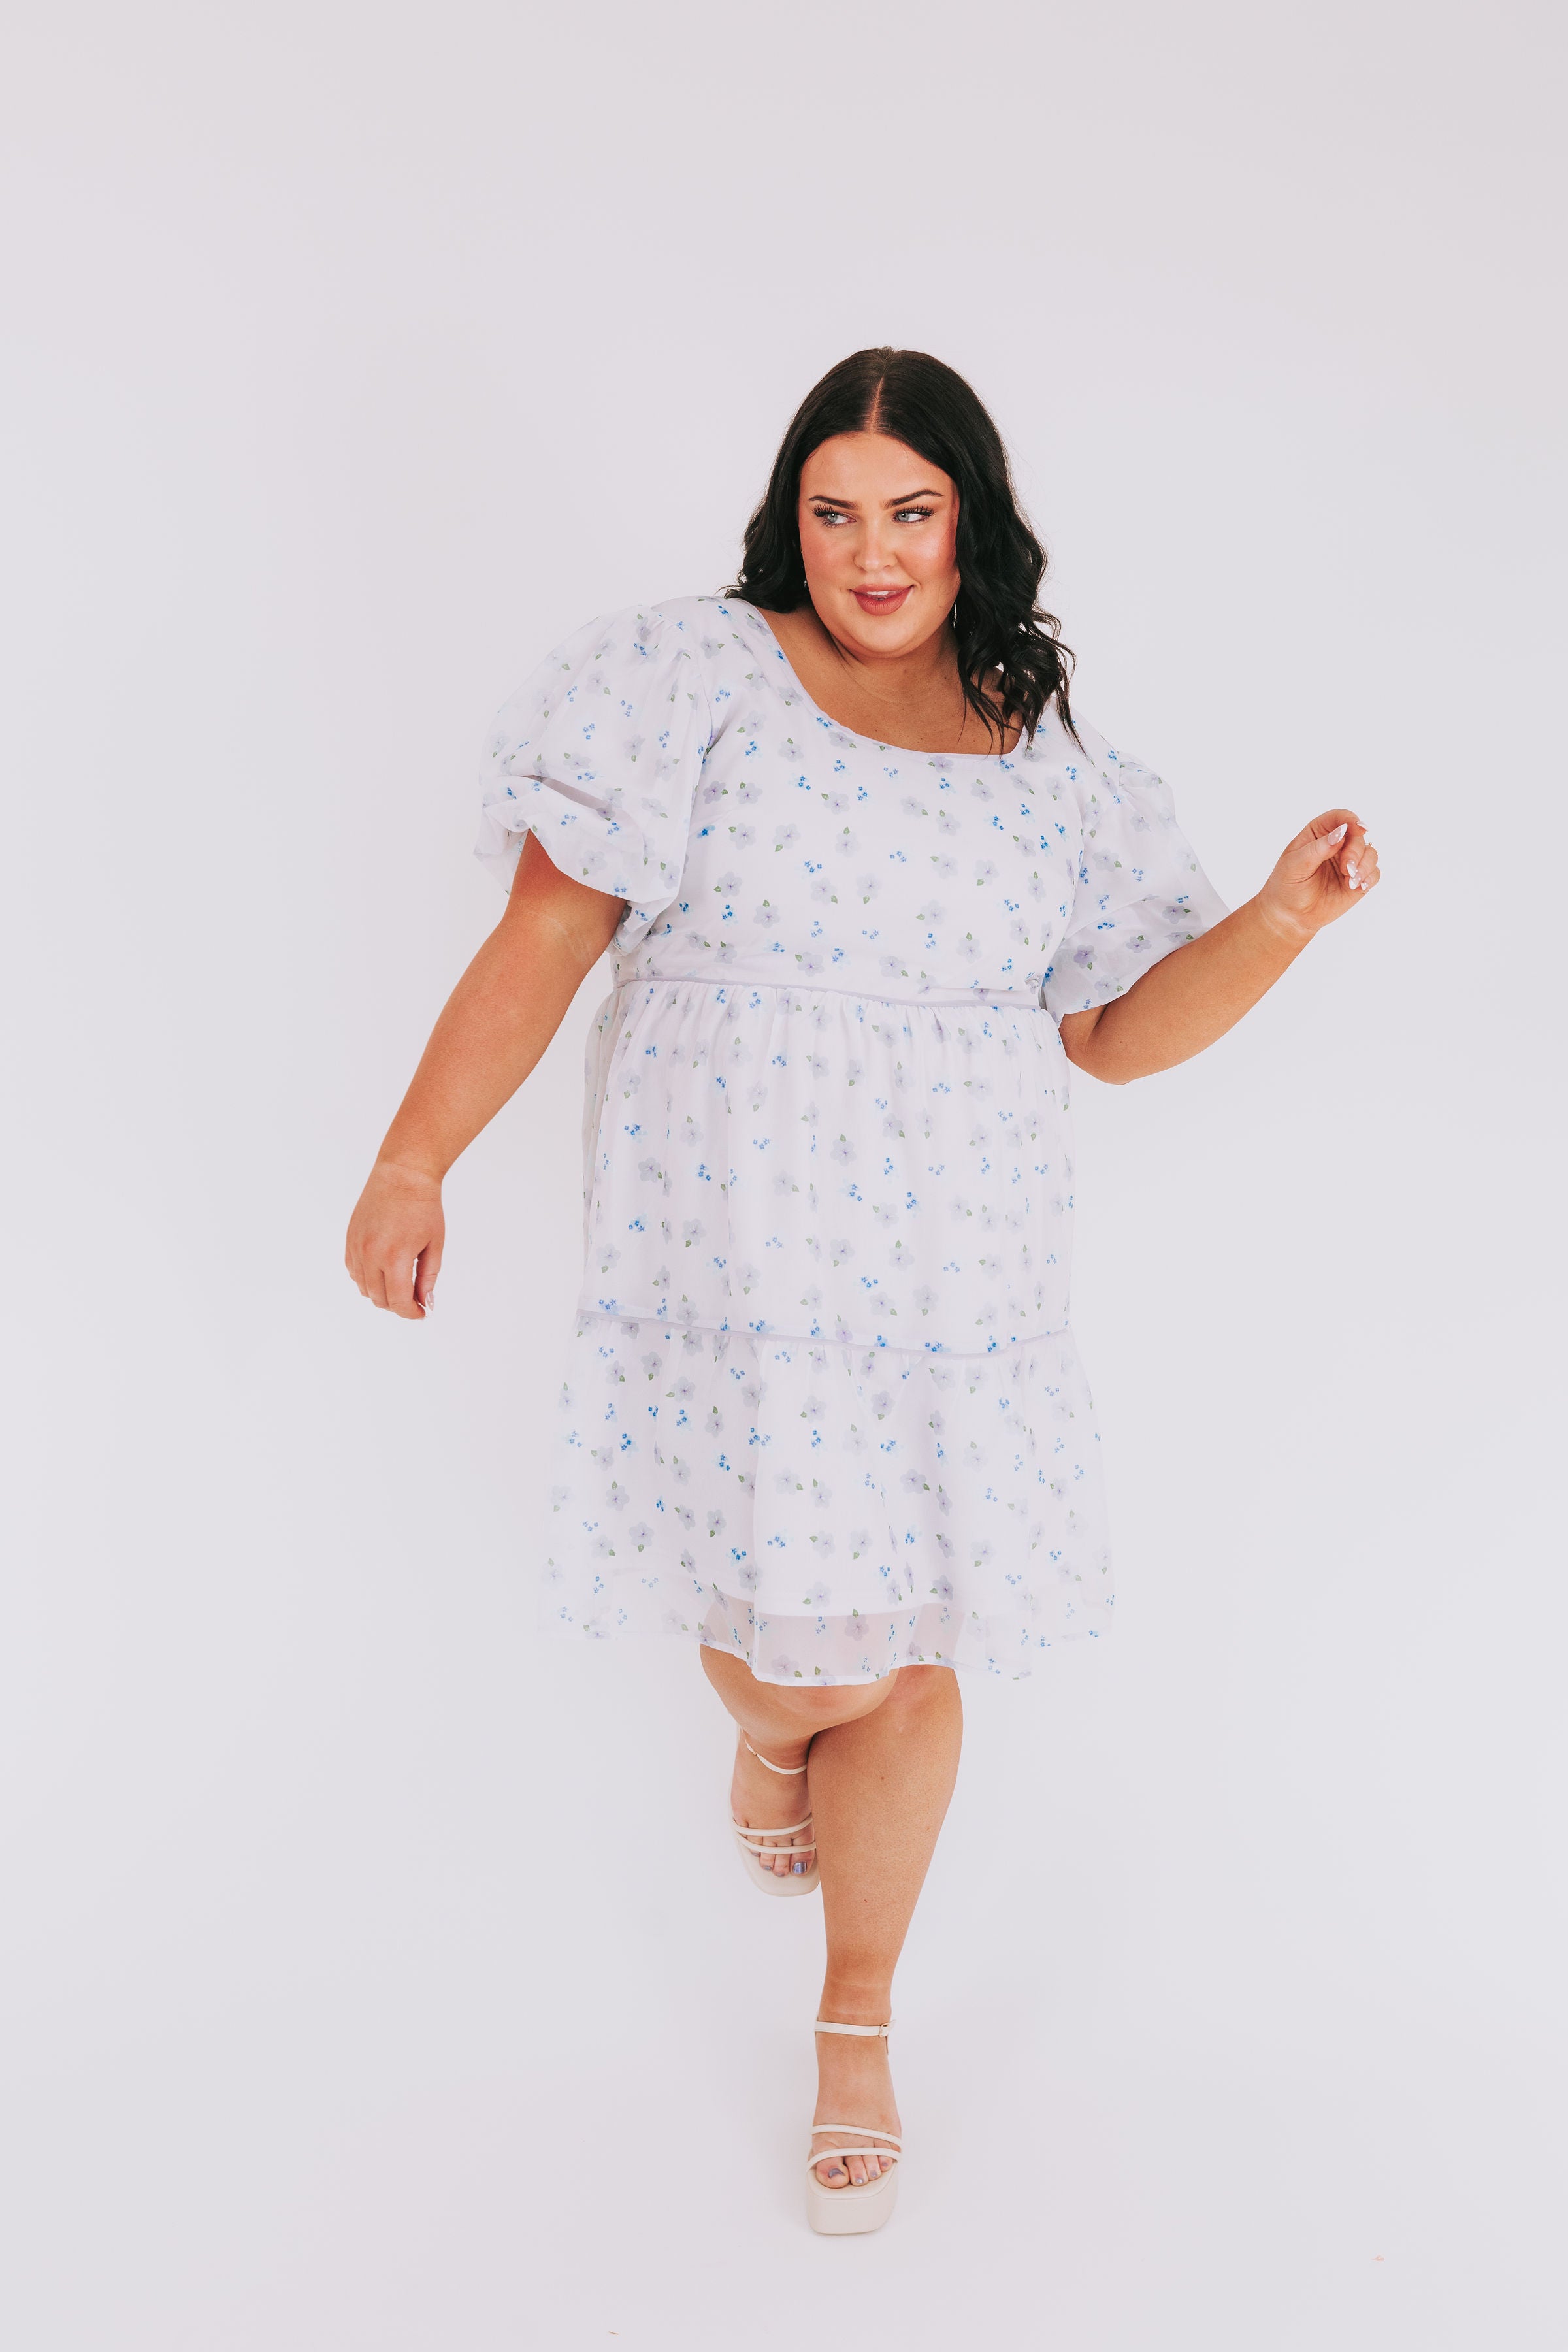 PLUS SIZE - Searching For Love Dress